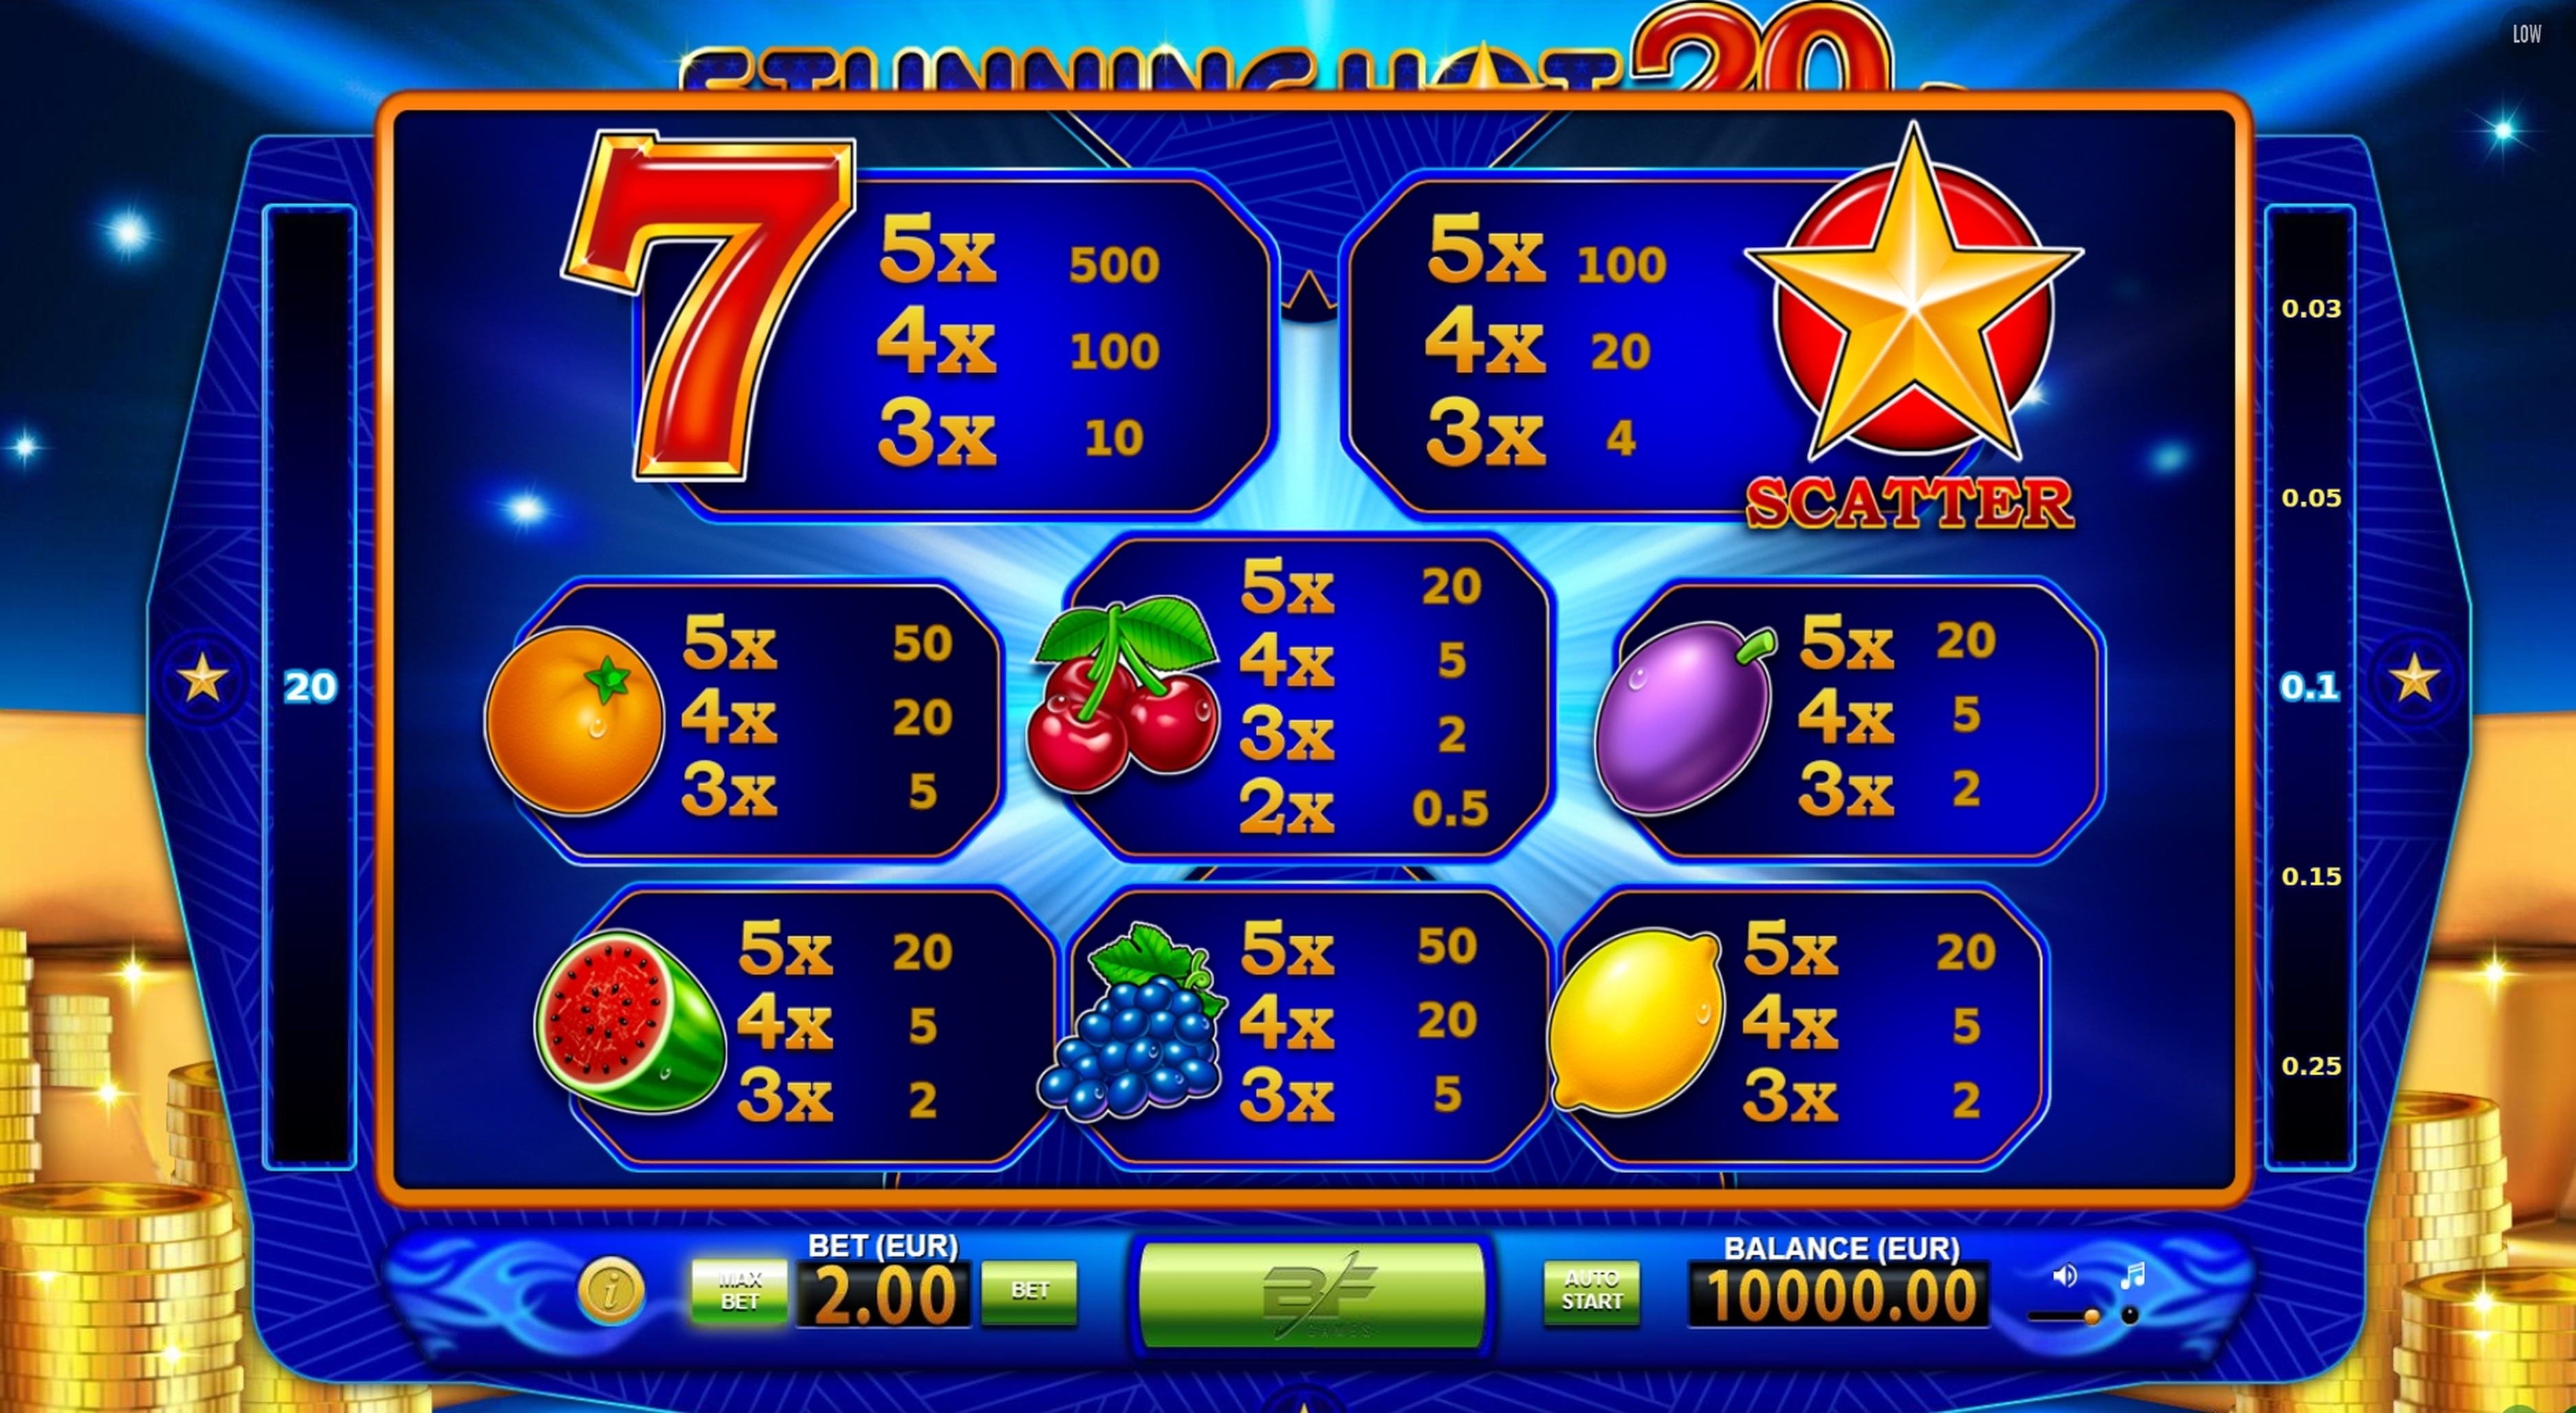 Info of Stunning Hot 20 Deluxe Slot Game by BF Games